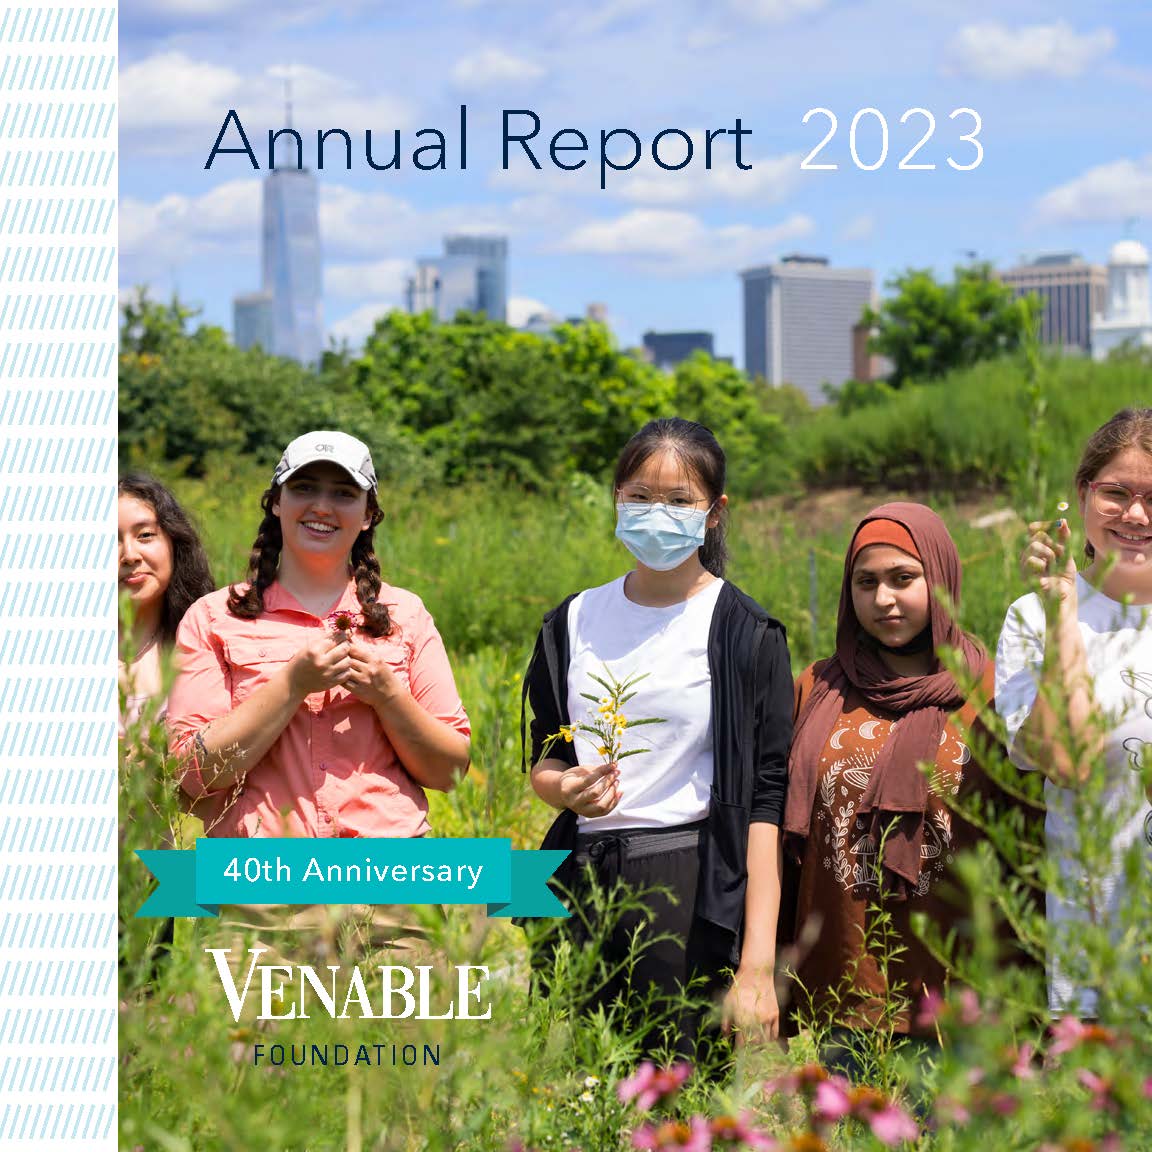 Venable Foundation Annual Report 2023